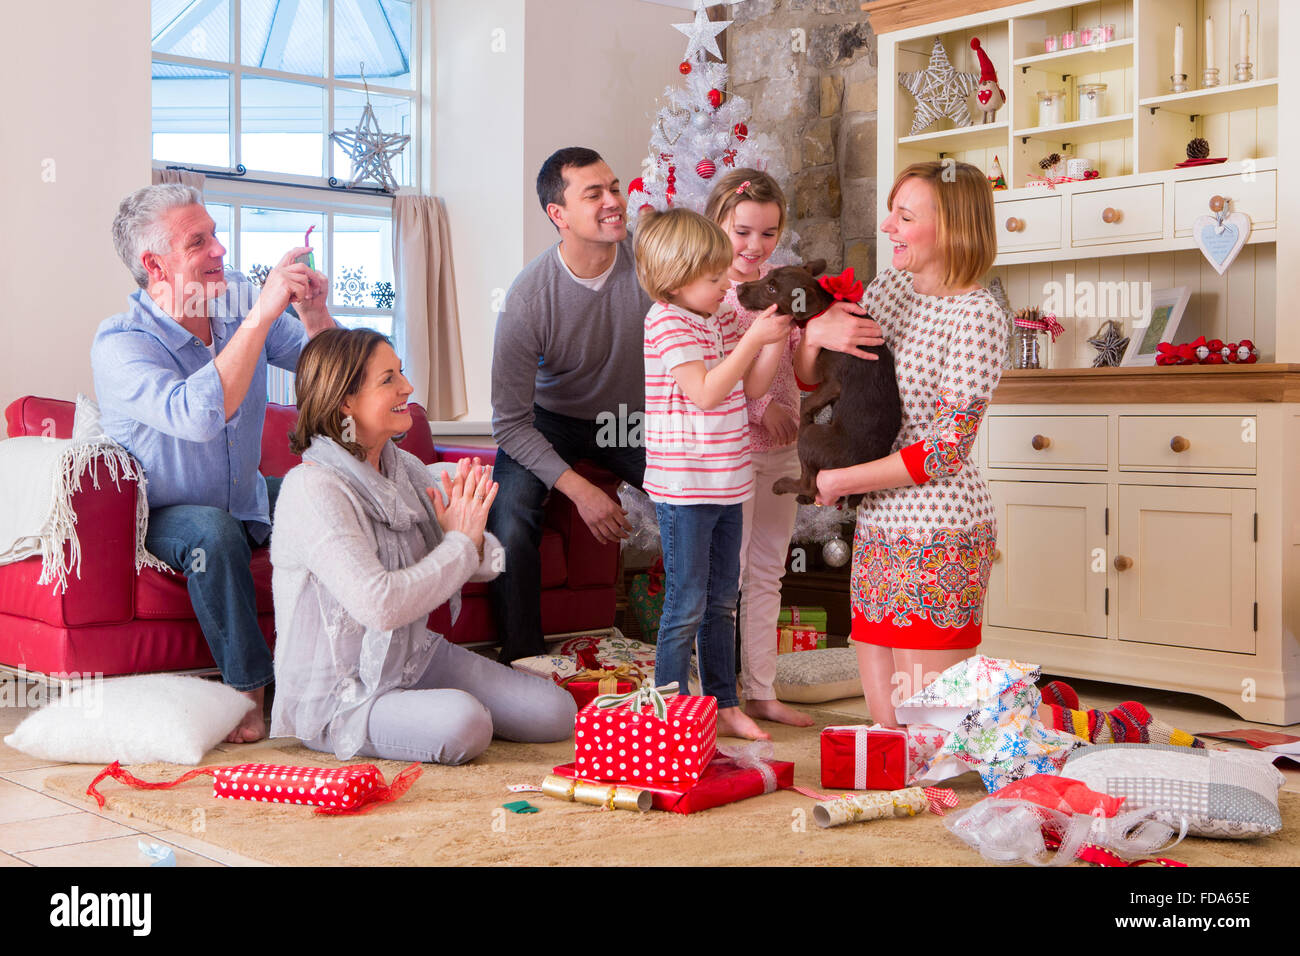 A Three Generation Family at Christmas. Mum holds a small brown dog with a ribbon around its neck and everyone looks surprised. Stock Photo